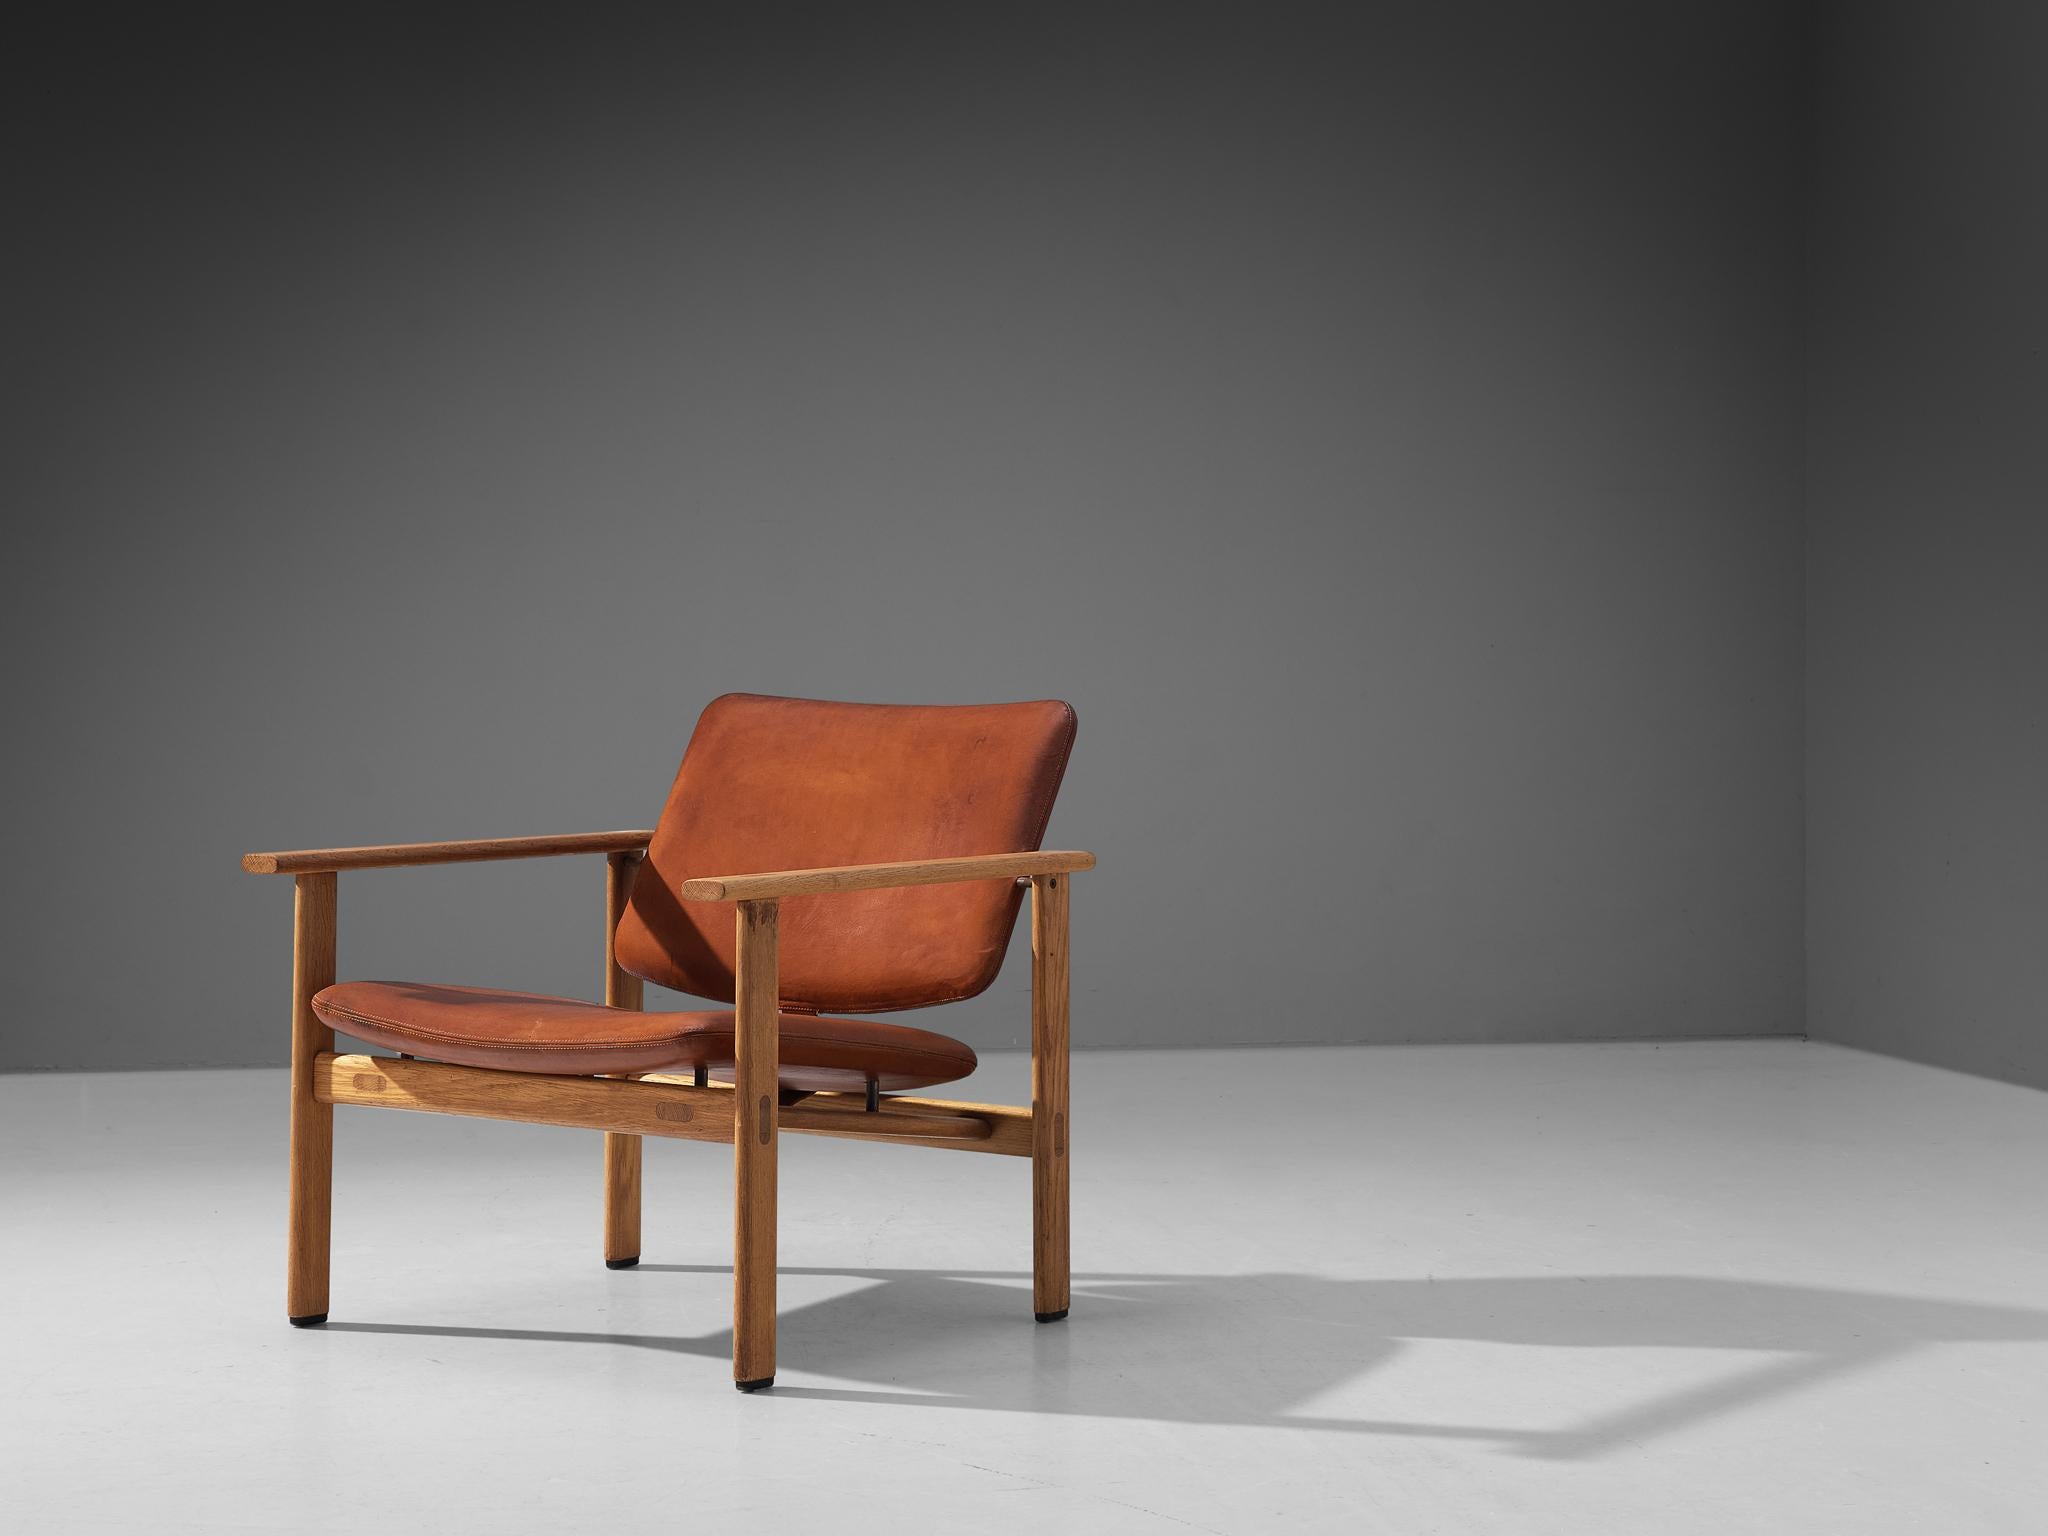 Arne Jacobsen for Fritz Hansen, armchair, model '4700', oak, leather, Denmark, 1965.

Armchair designed by the Danish designer Arne Jacobsen (1902-1971). The frame shows elegant geometric lines and is executed in solid oak. A nice detail are the